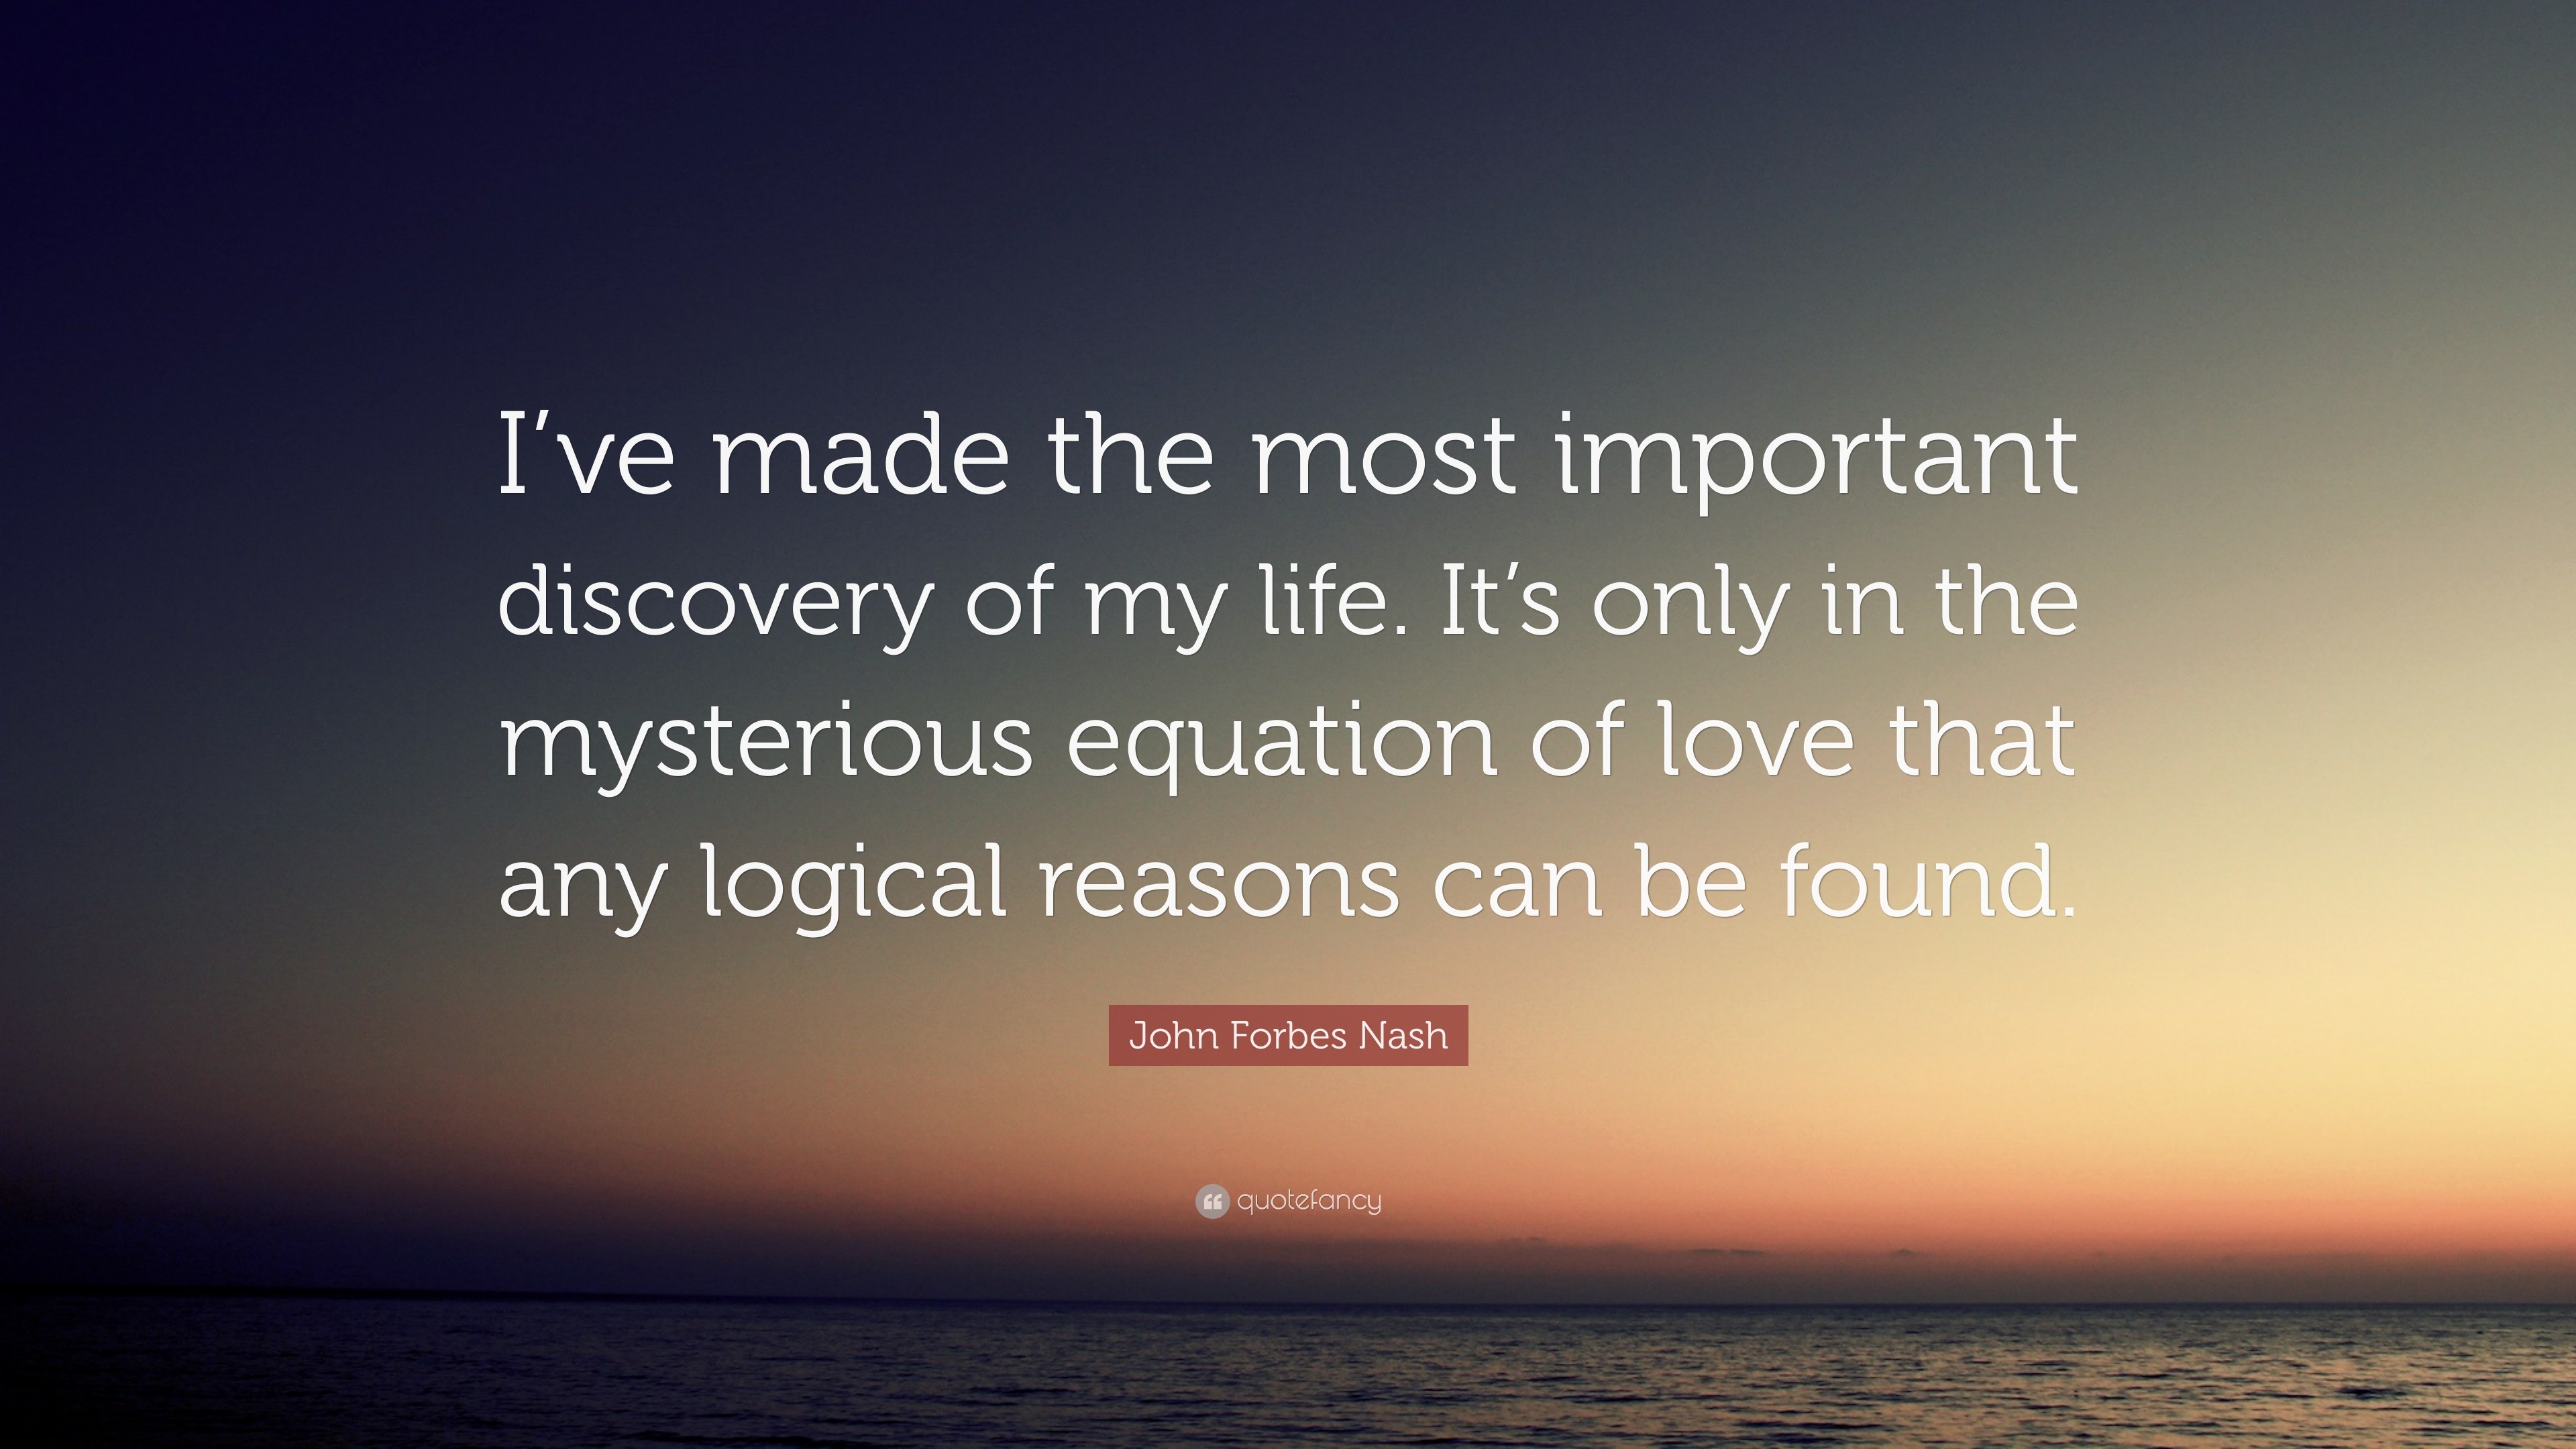 John Forbes Nash Quote “I ve made the most important discovery of my